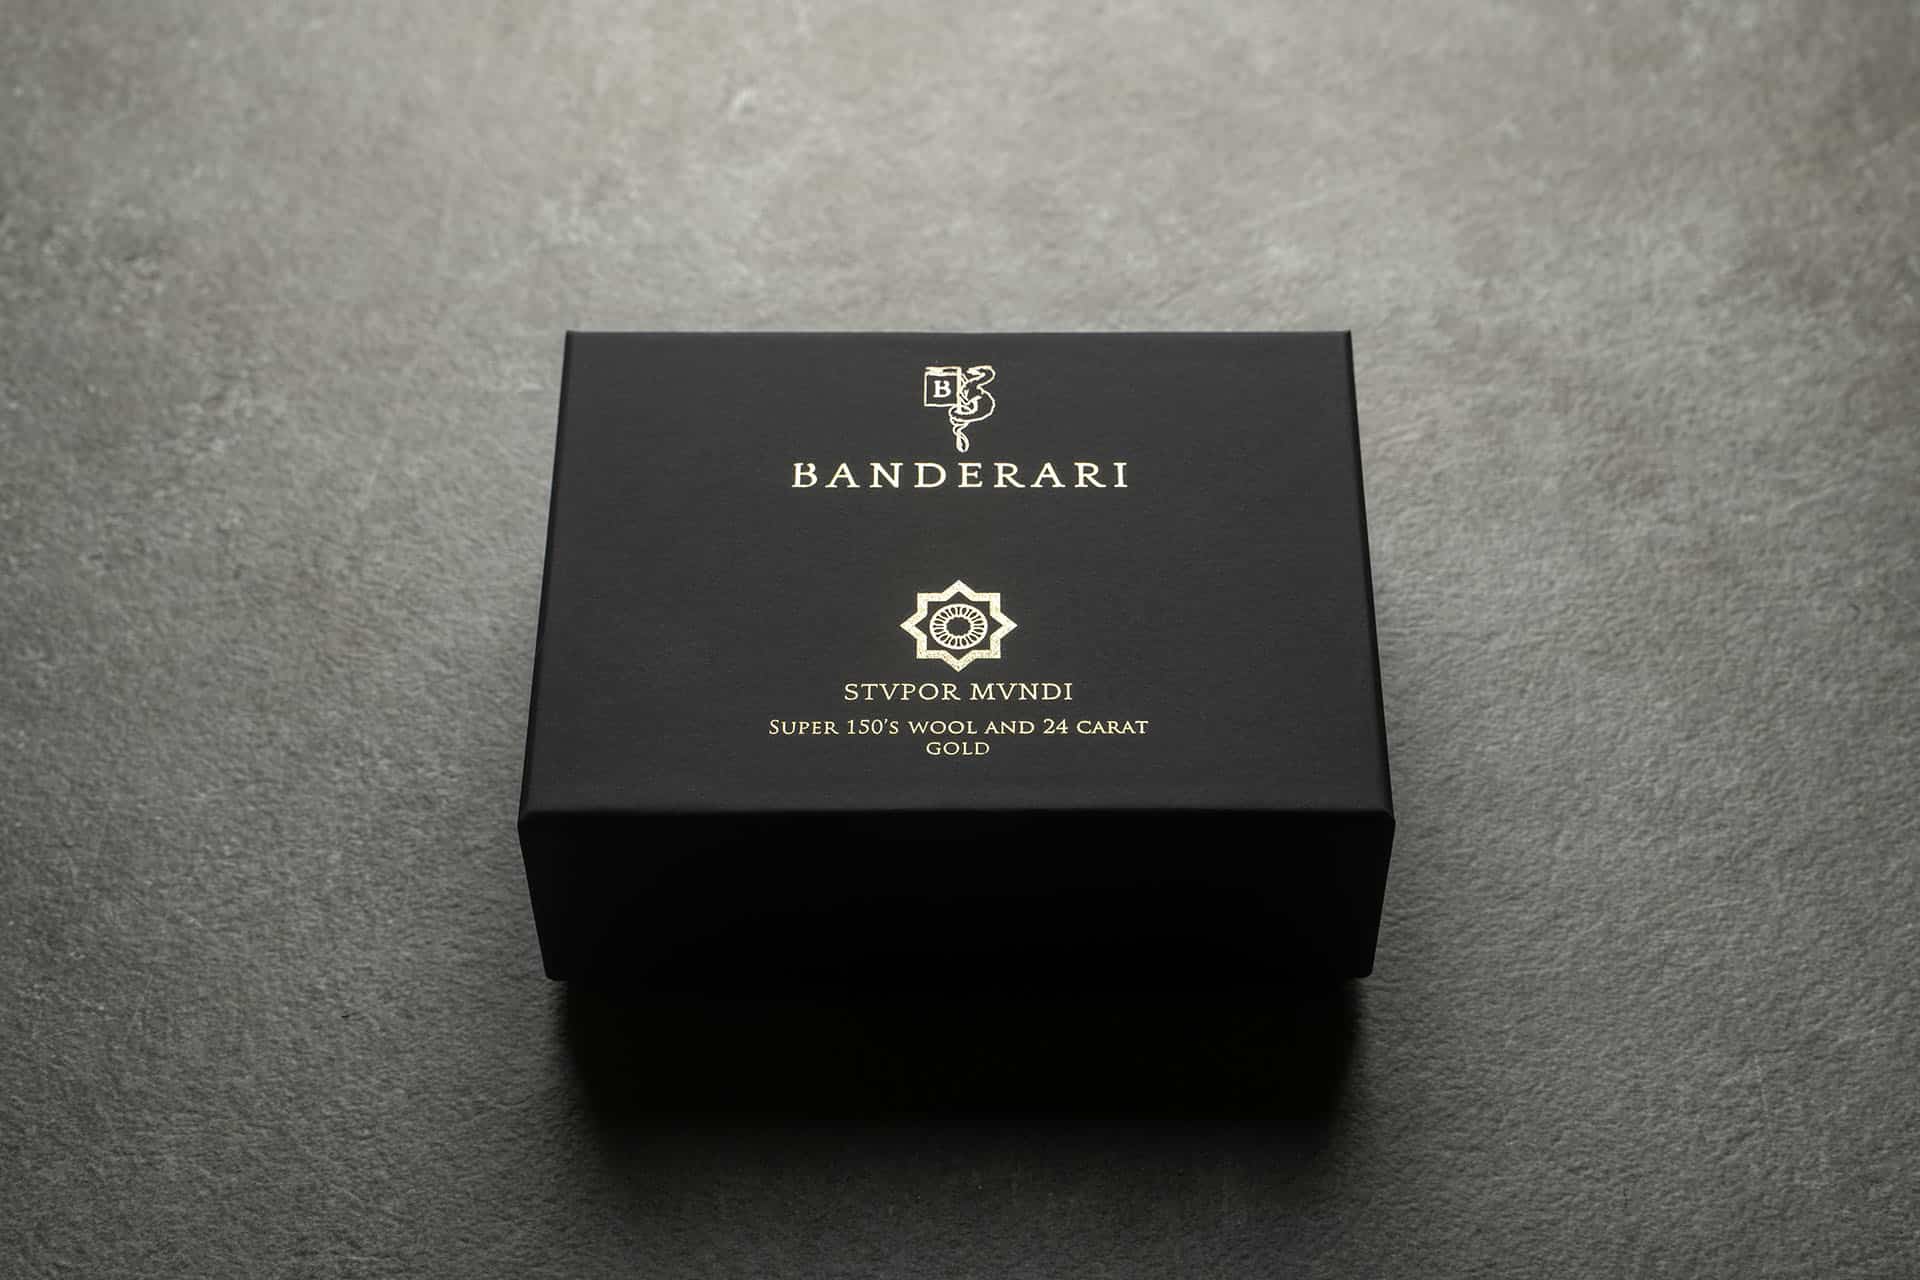 Packaging of the Banderari Stvpor Mvndi bow tie from the Luxus collection